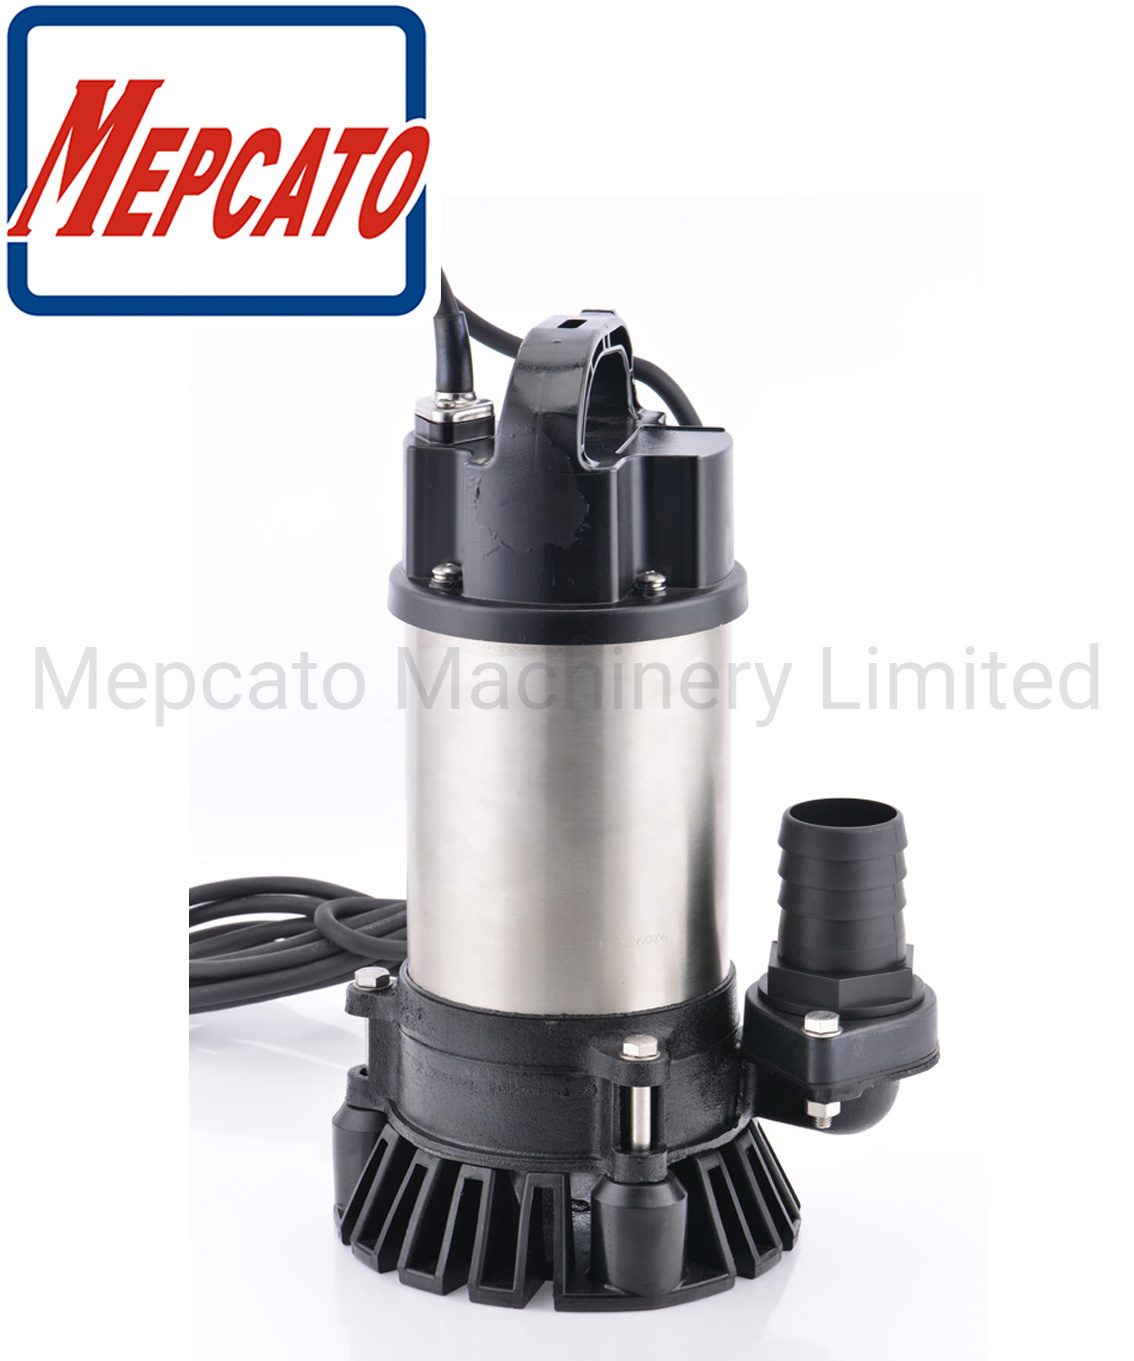 400W Construction Civil Engineering Sludge Slurry Waste Water Vortex Stainless Steel Submersible Centrifugal Sewage Water Pump with Floater